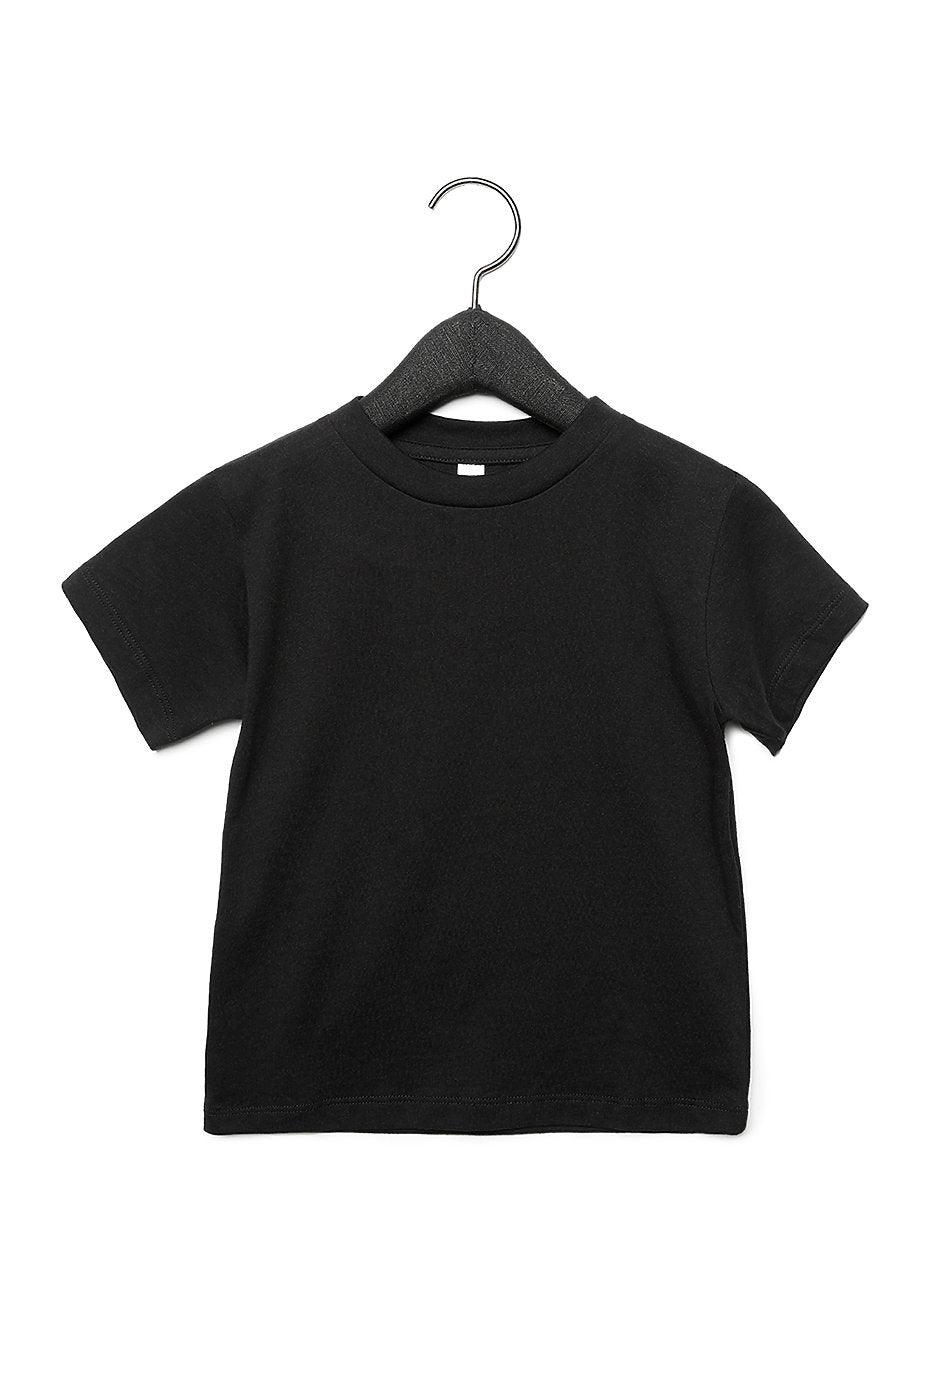 Bella and Canvas black toddler crew neck T shirt